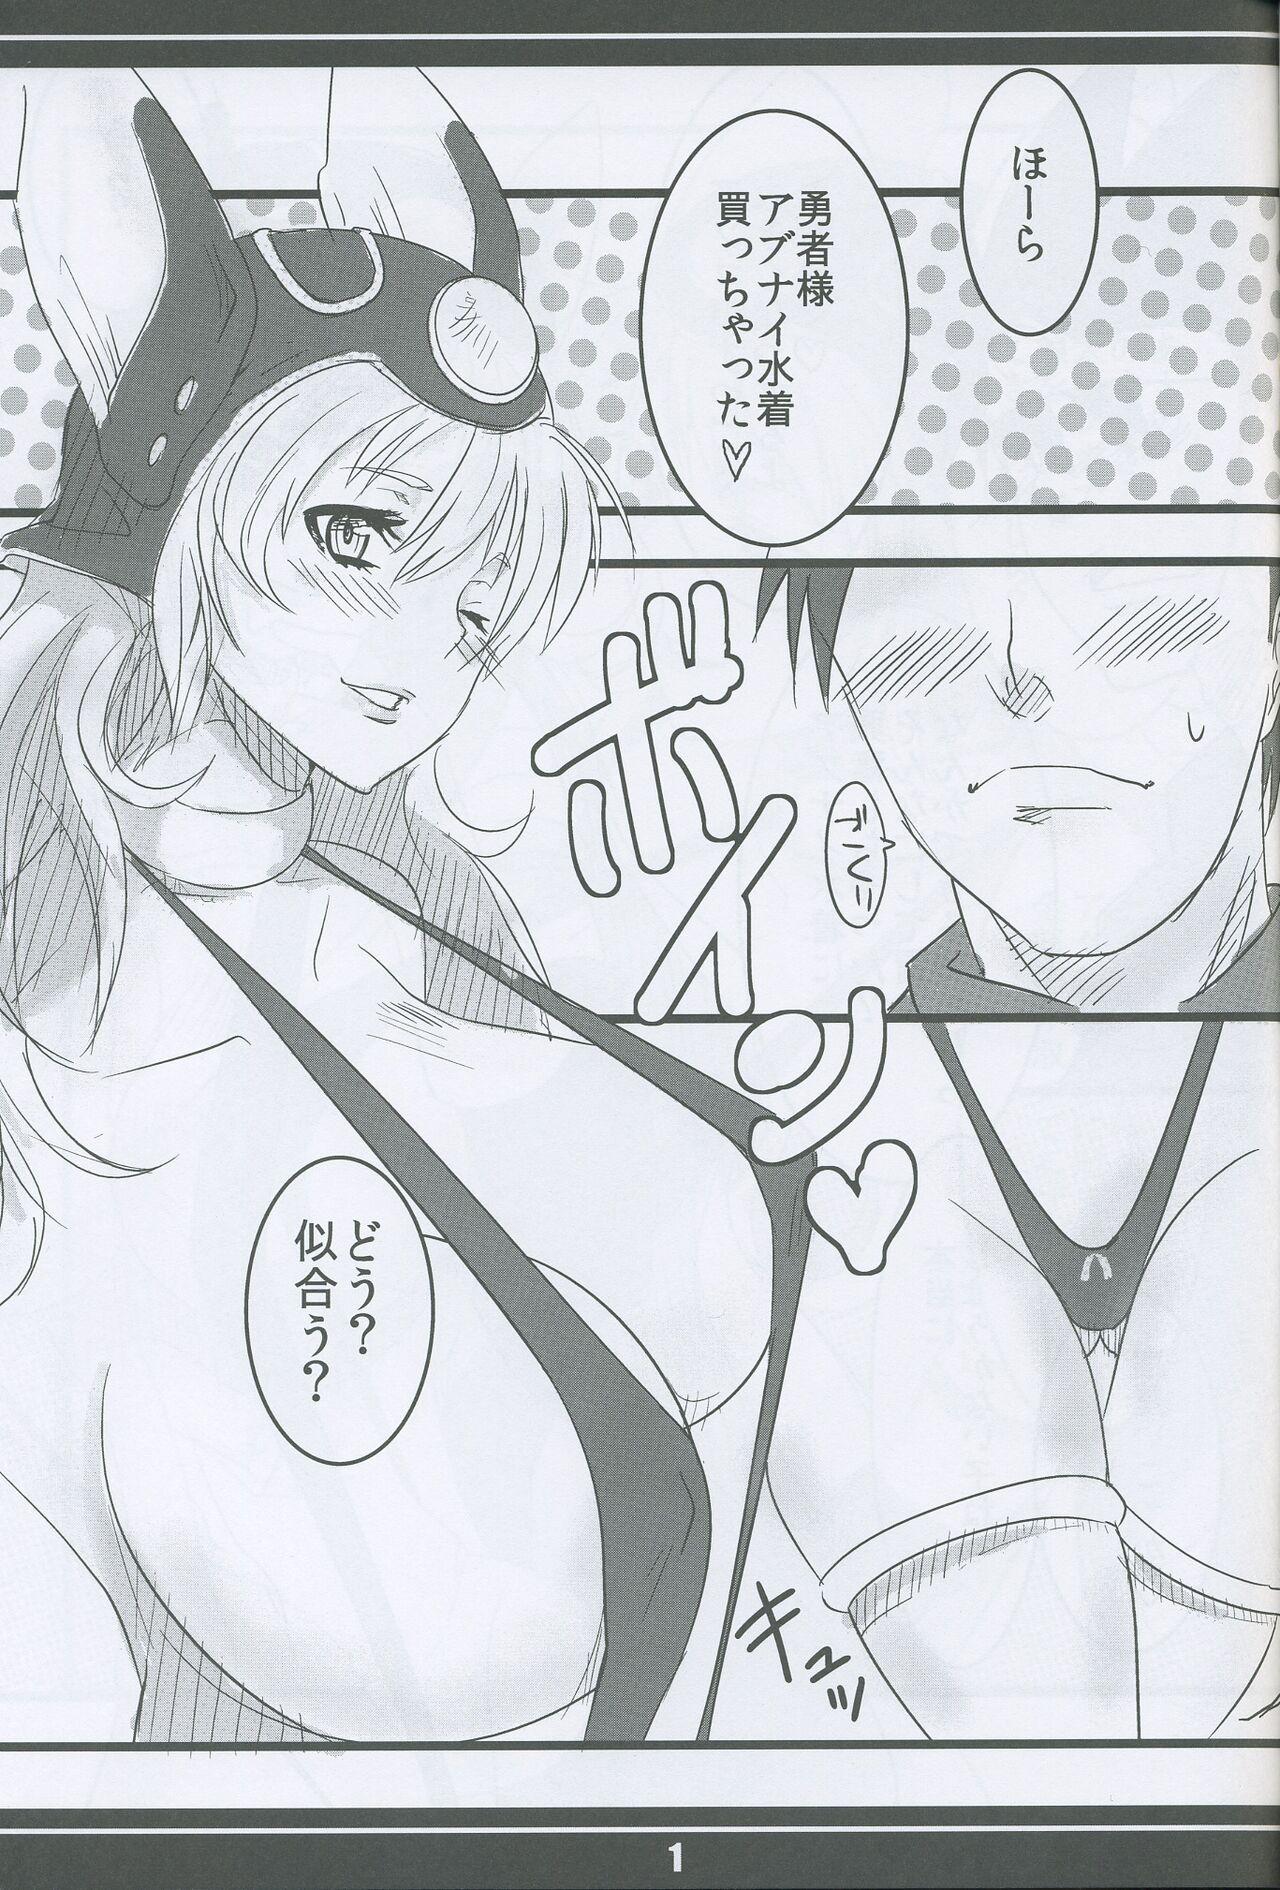 Hot Naked Women 戦士さんの本 - Dragon quest iii Balls - Page 2